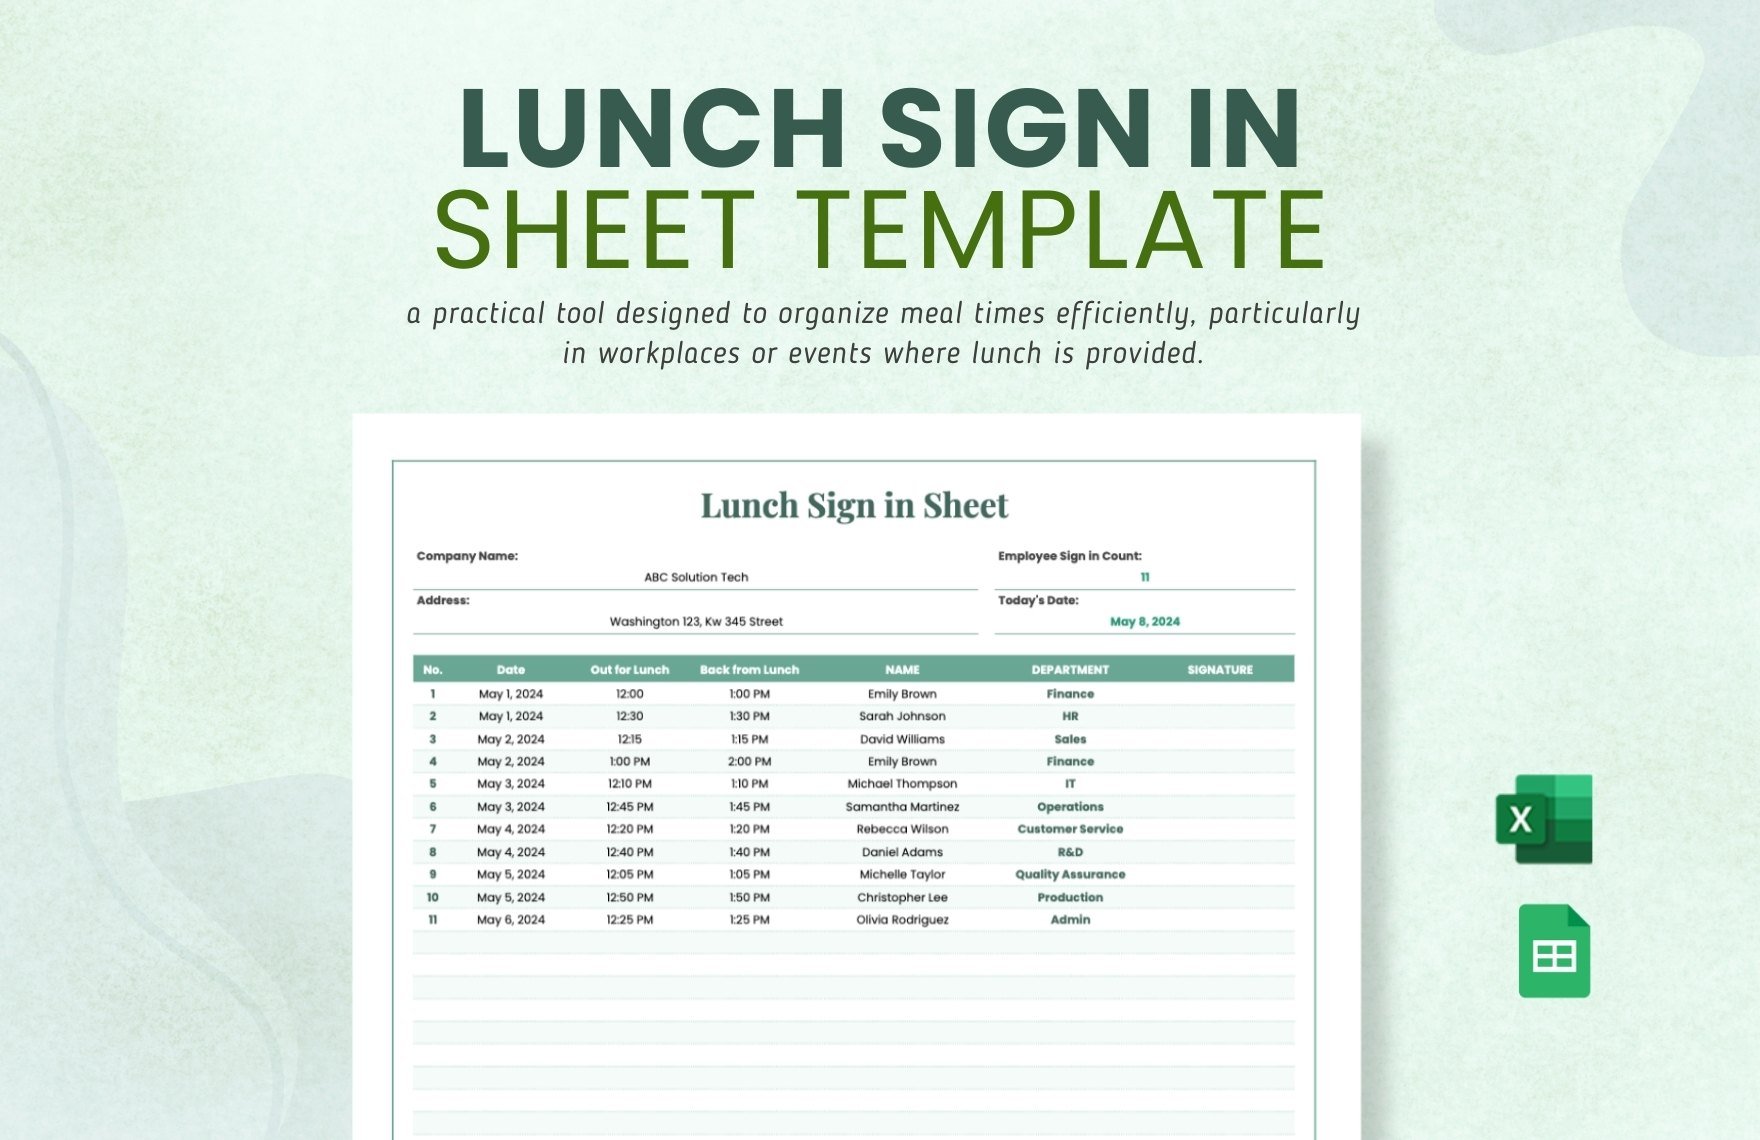 Lunch Sign in Sheet Template